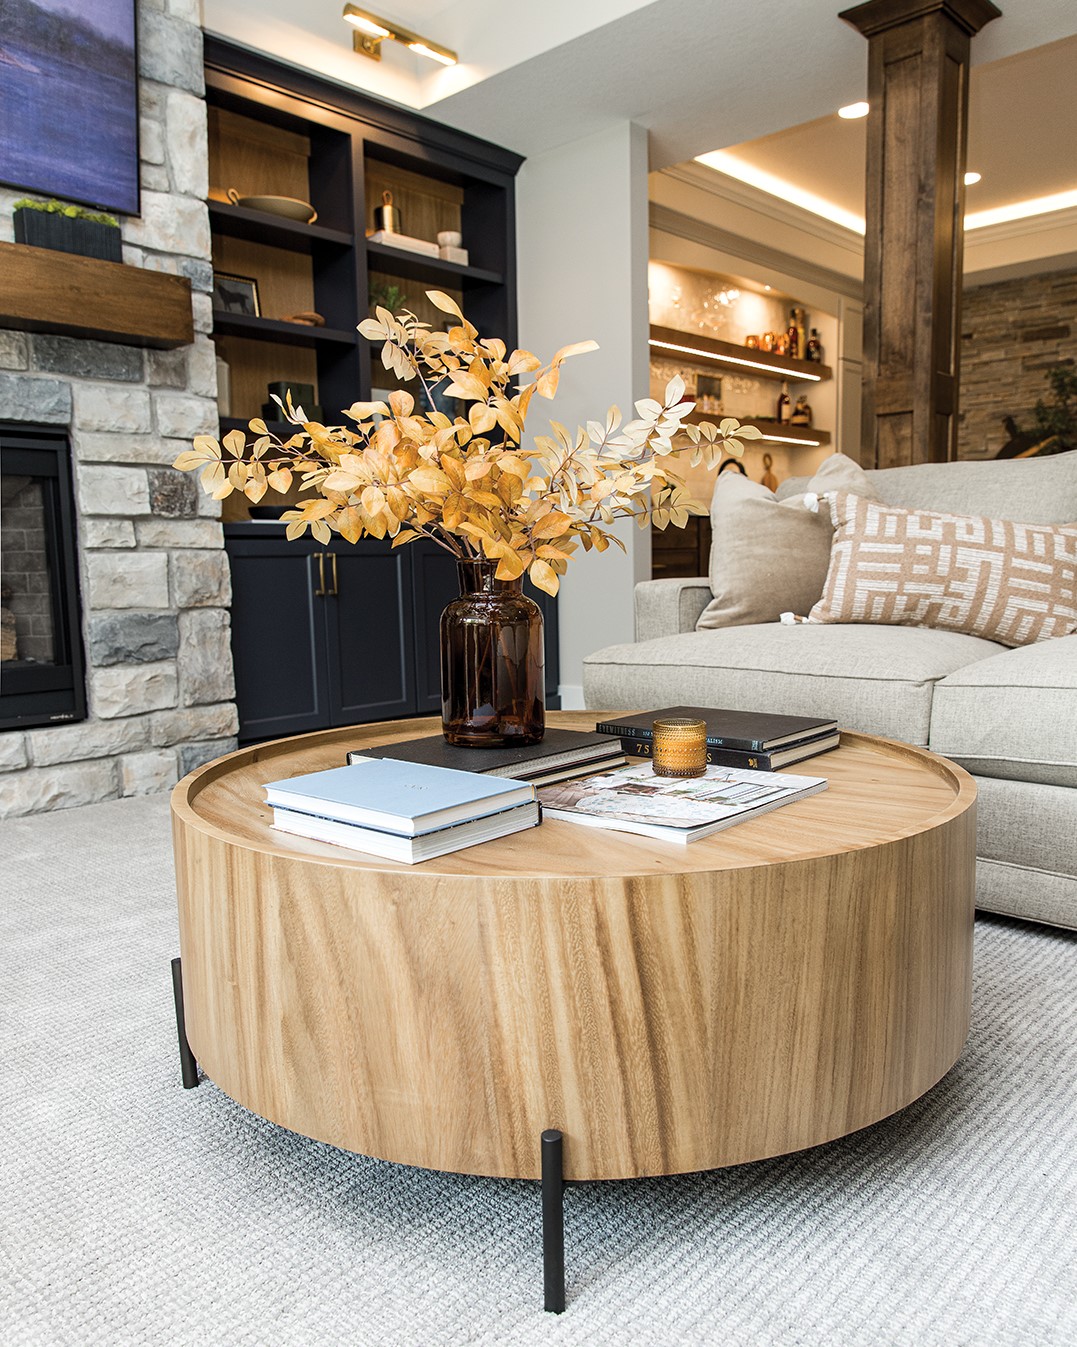 Goldfarb chose a circular coffee table to break up the square lines of the sectional sofa. The table is made with white oak and metal to tie into the shelves surrounding the fireplace.